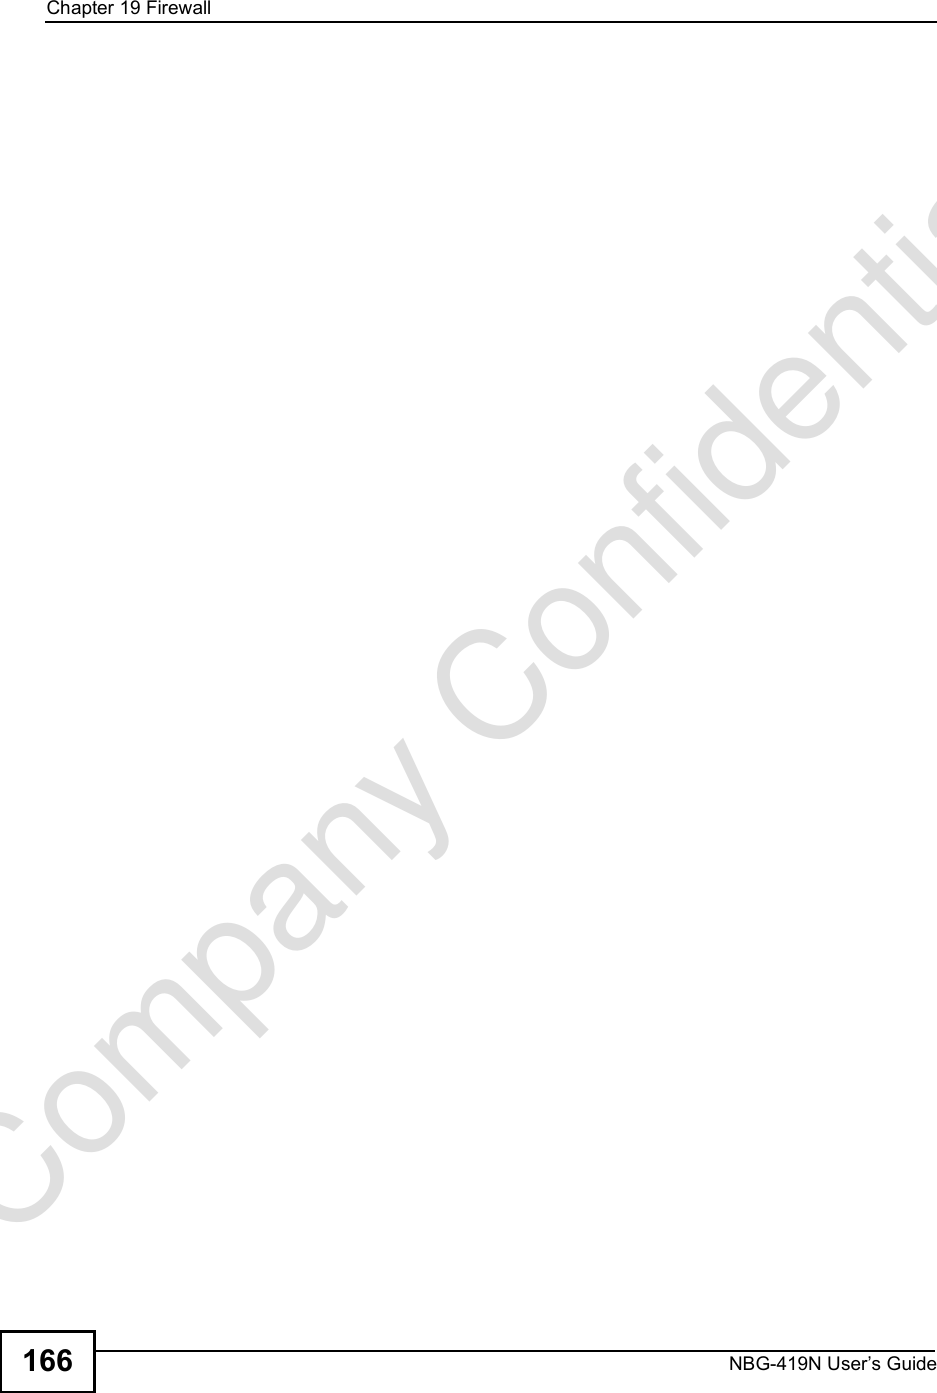 Chapter 19FirewallNBG-419N User s Guide166Company Confidential